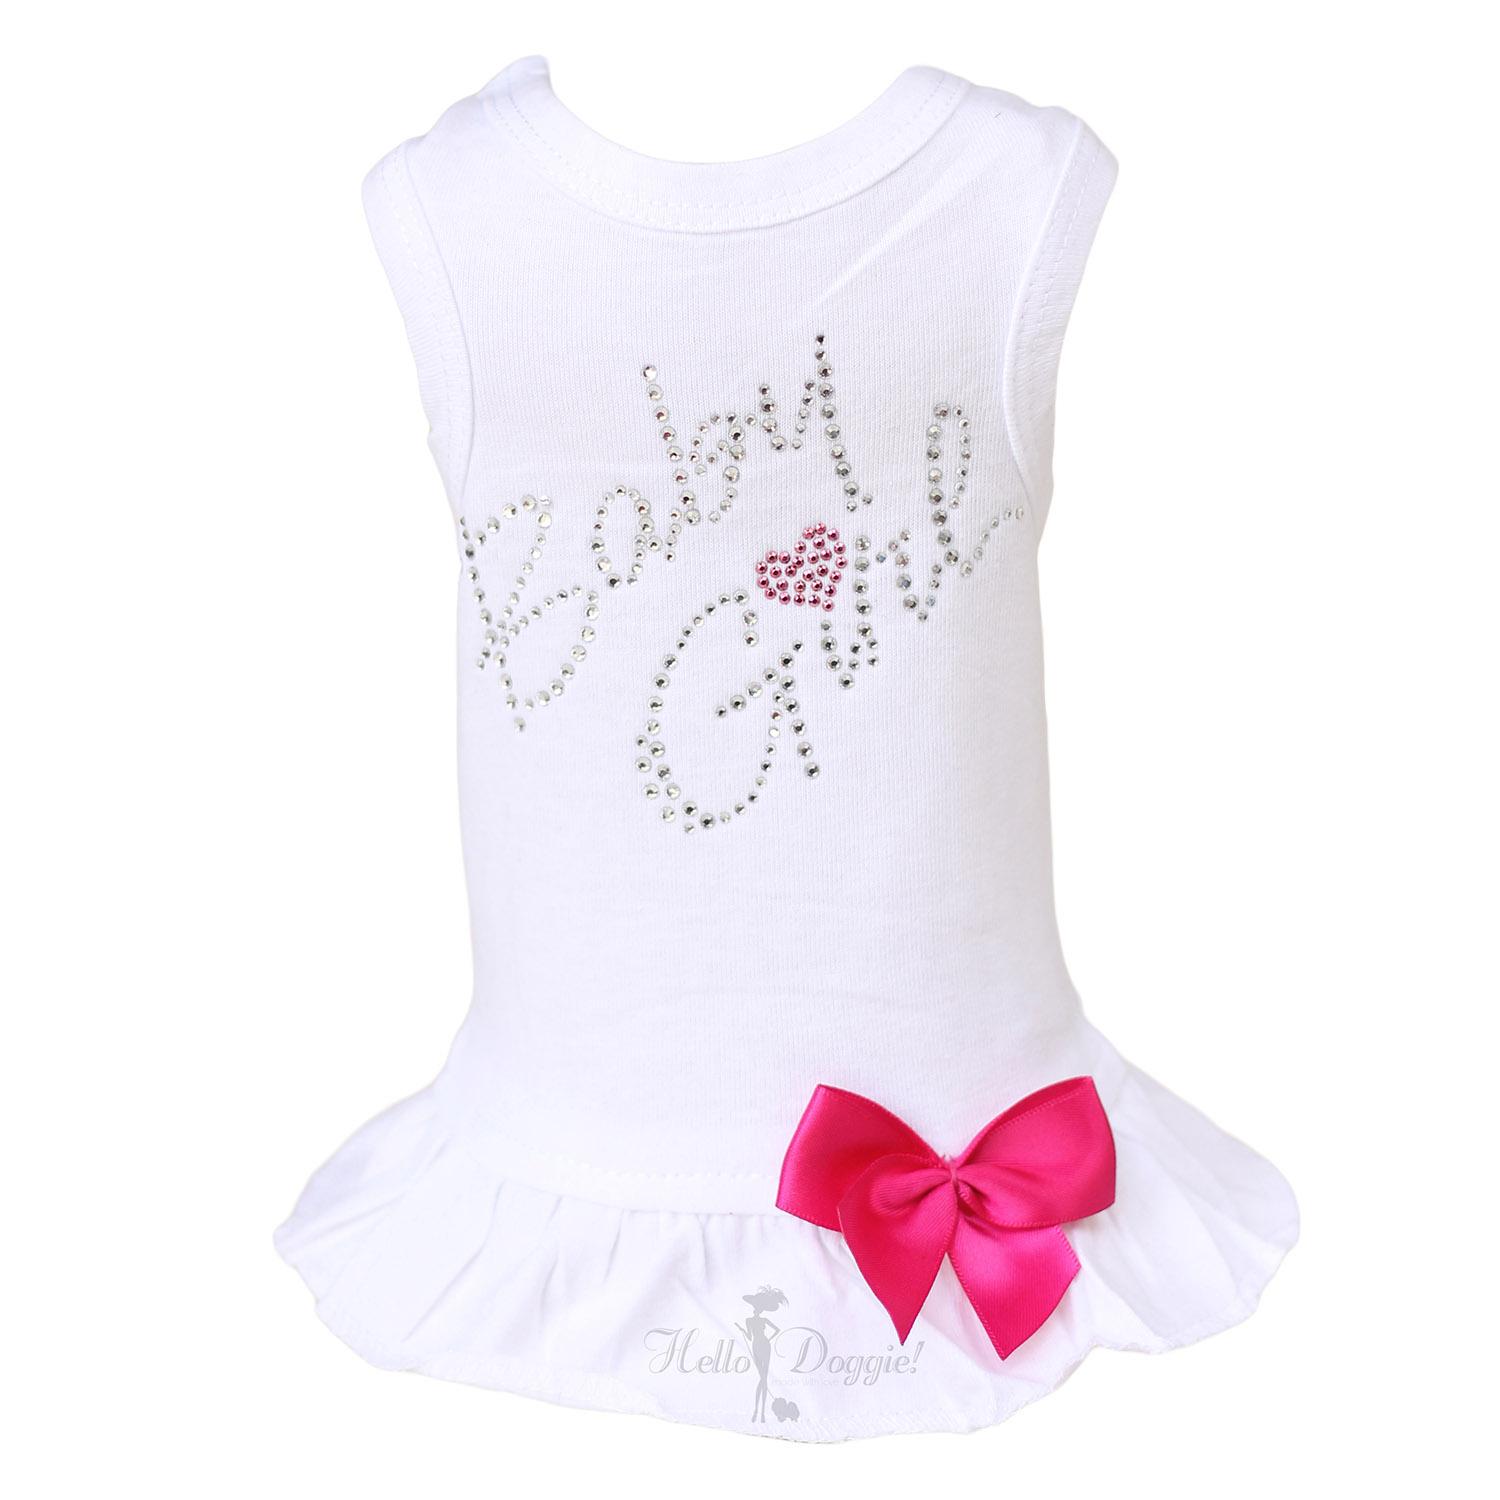 Hello Doggie Baby Girl Dog Dress - White with Pink Bow